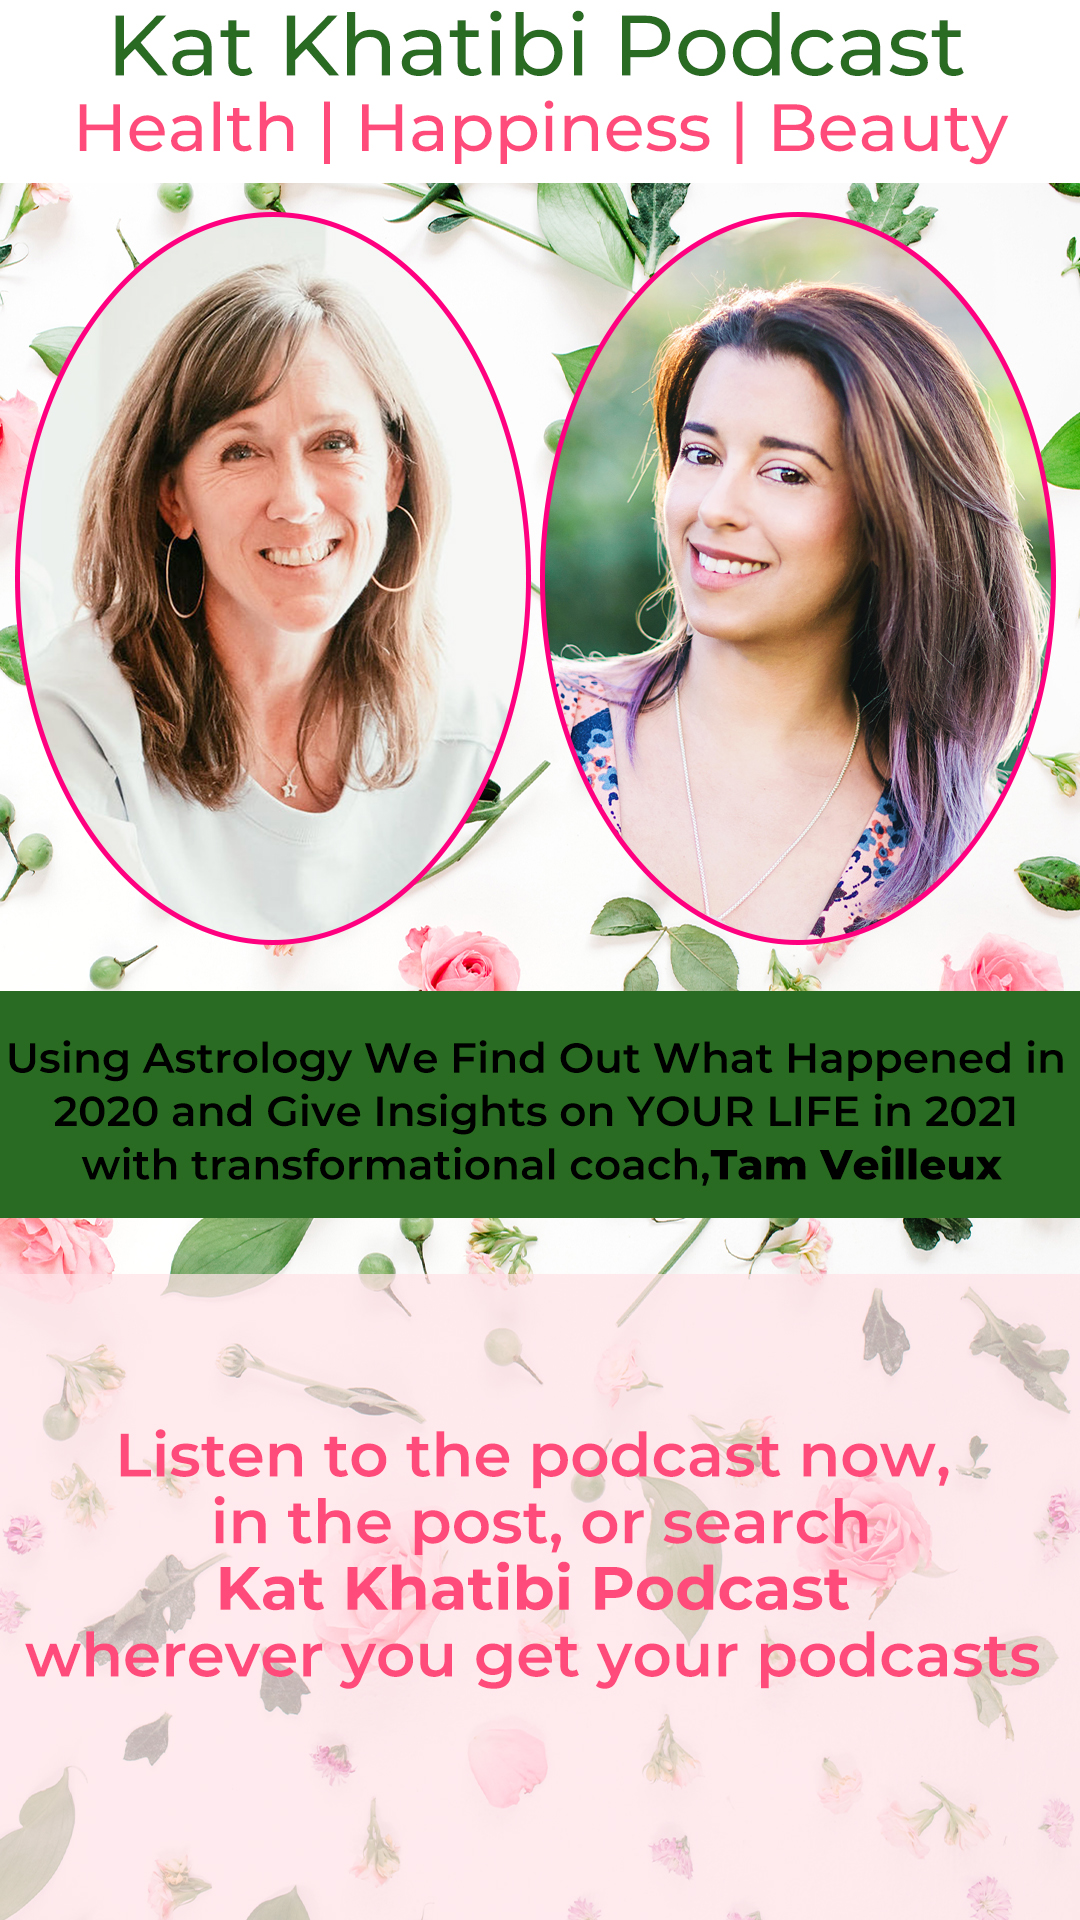 Using Astrology We Find Out What Happened in 2020 and Give Insights on YOUR LIFE in 2021 with transformational coach,Tam Veilleux